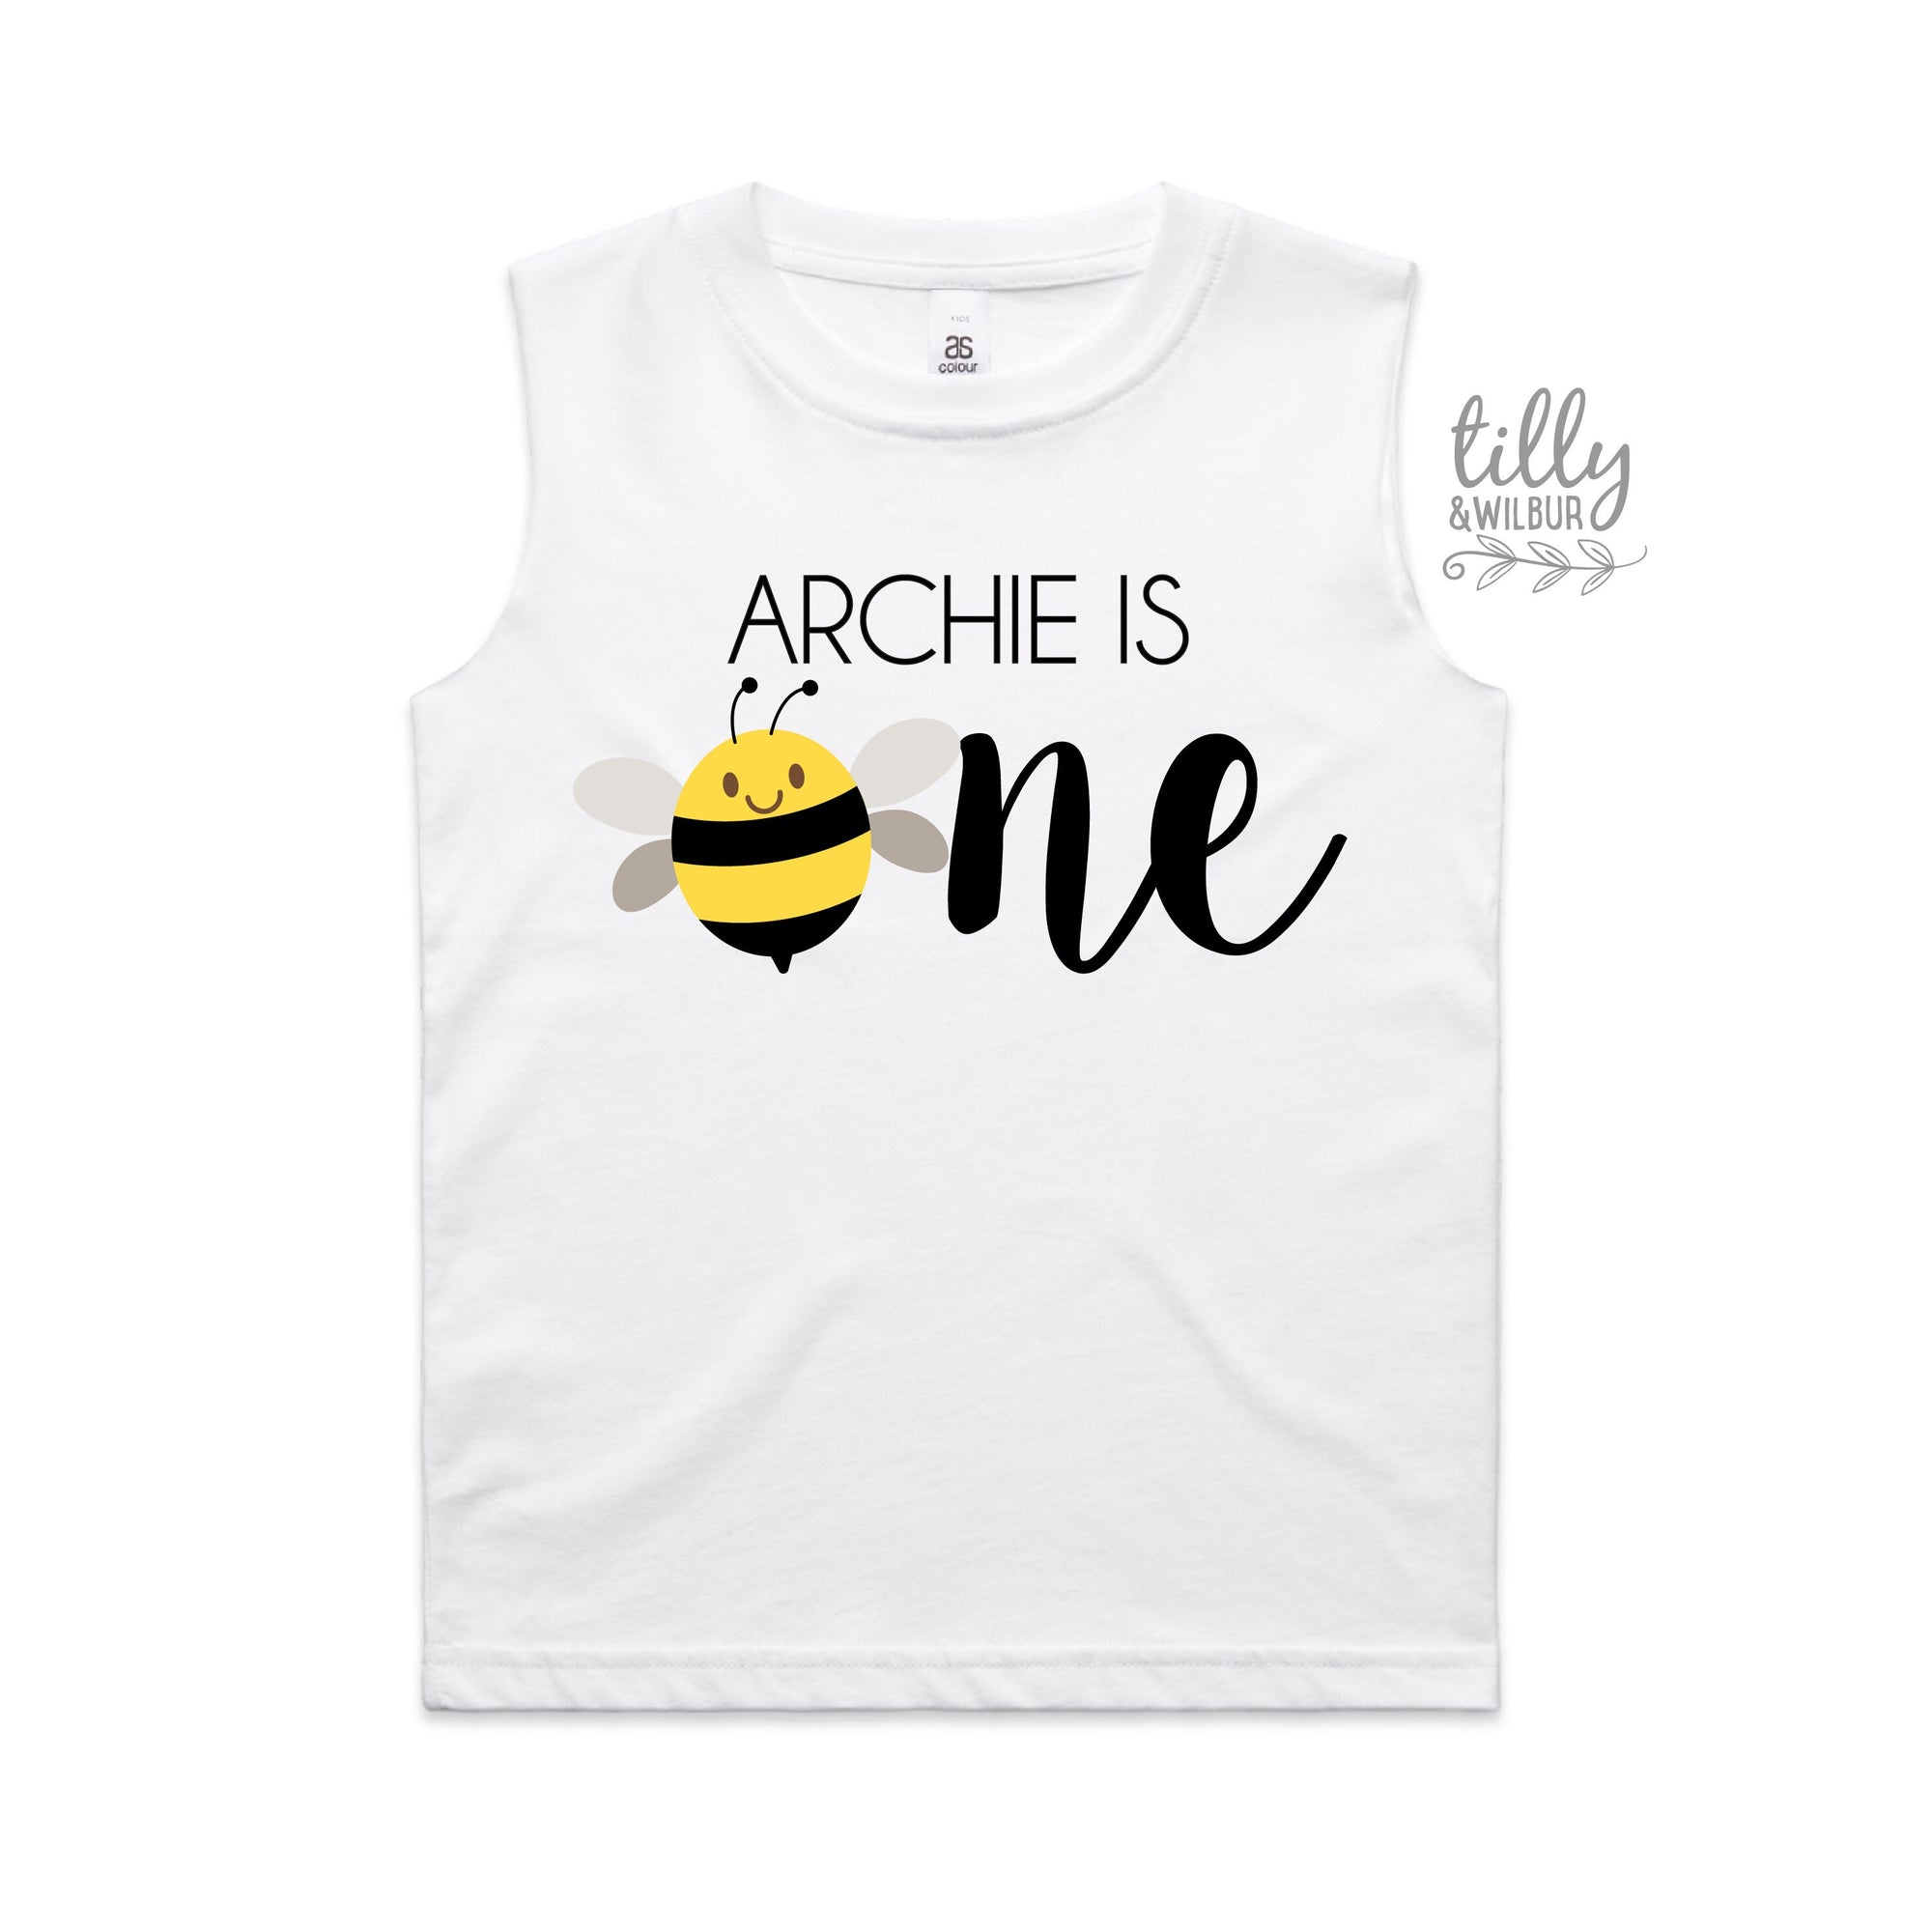 1st Birthday Singlet, Bumble Bee Theme Birthday Party, Personalised Birthday Tank, Bee Birthday T-Shirt, First Birthday T-Shirt, One Today